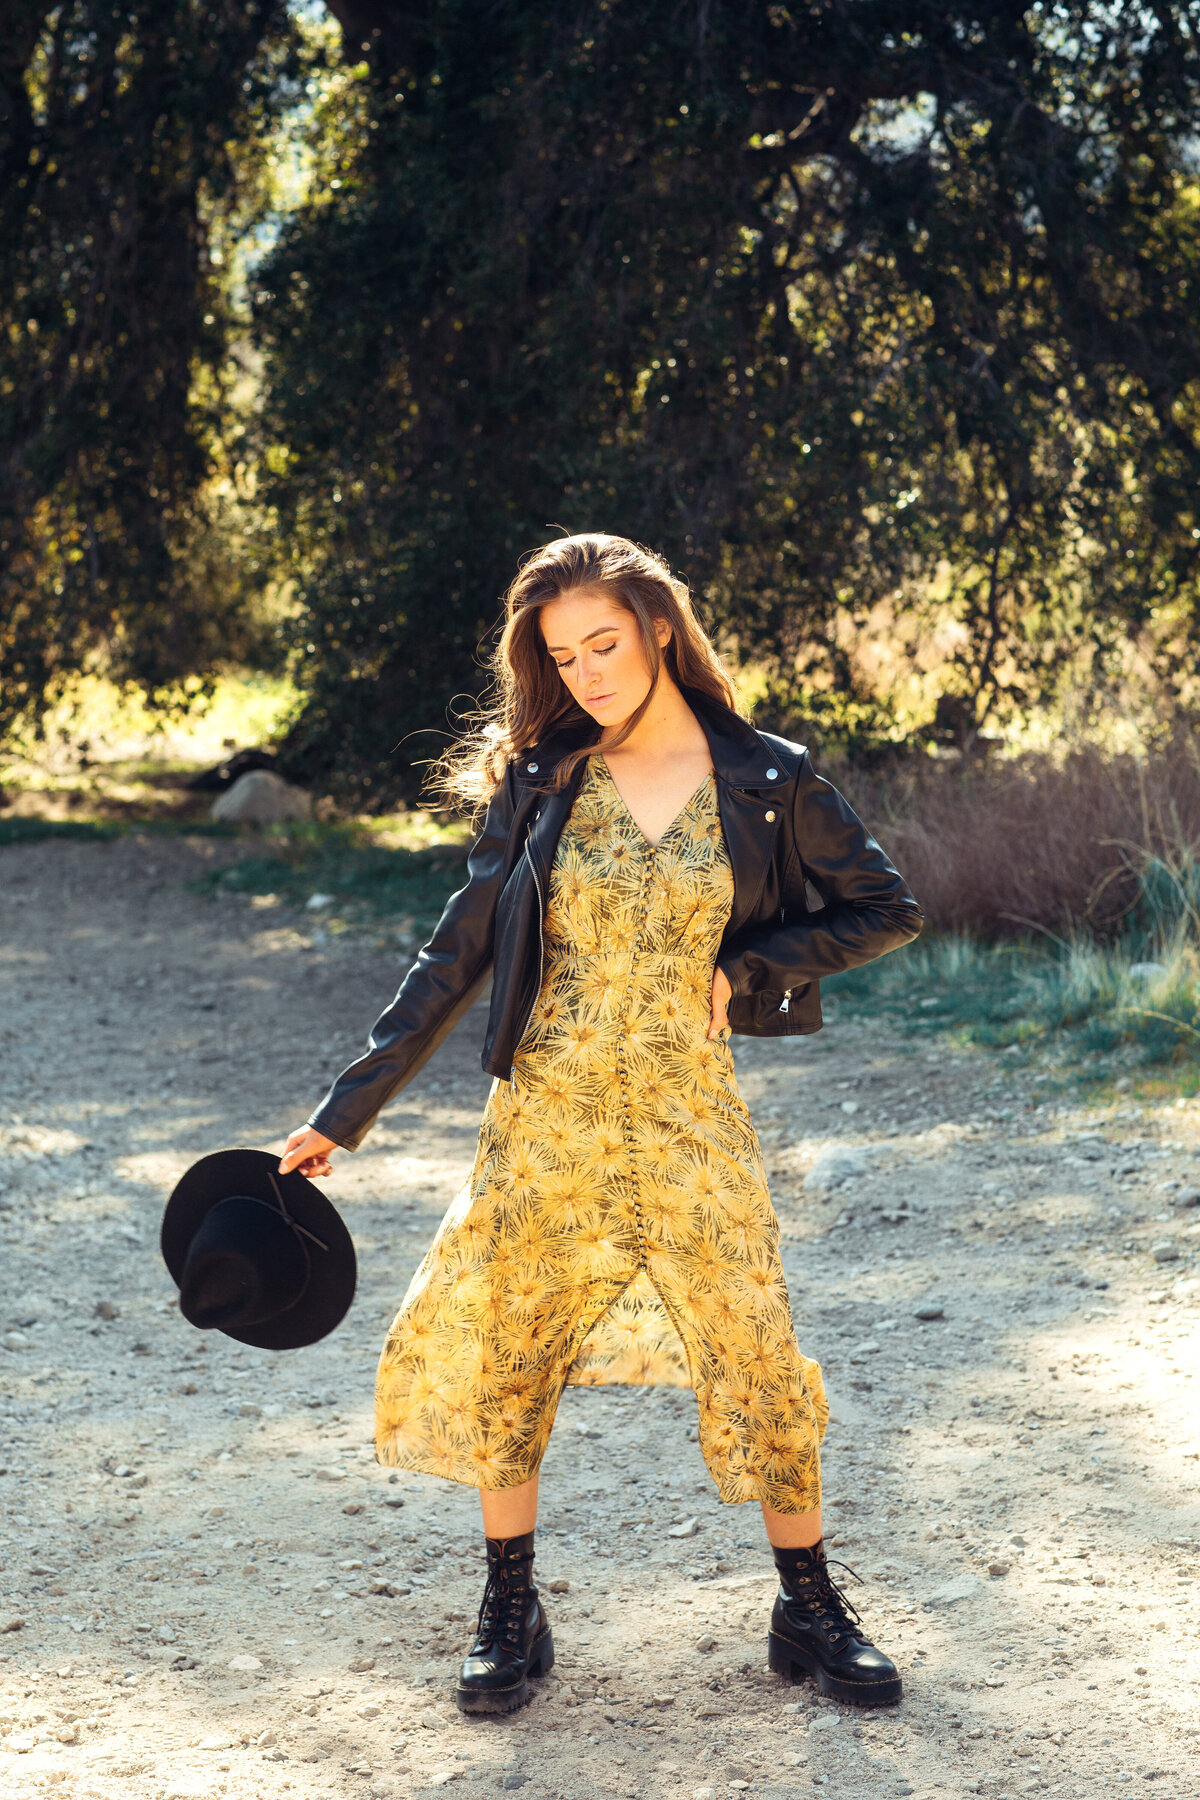 Portrait Photo Of Young Woman In Black Boots Carrying Her Cowboy Hat Los Angeles